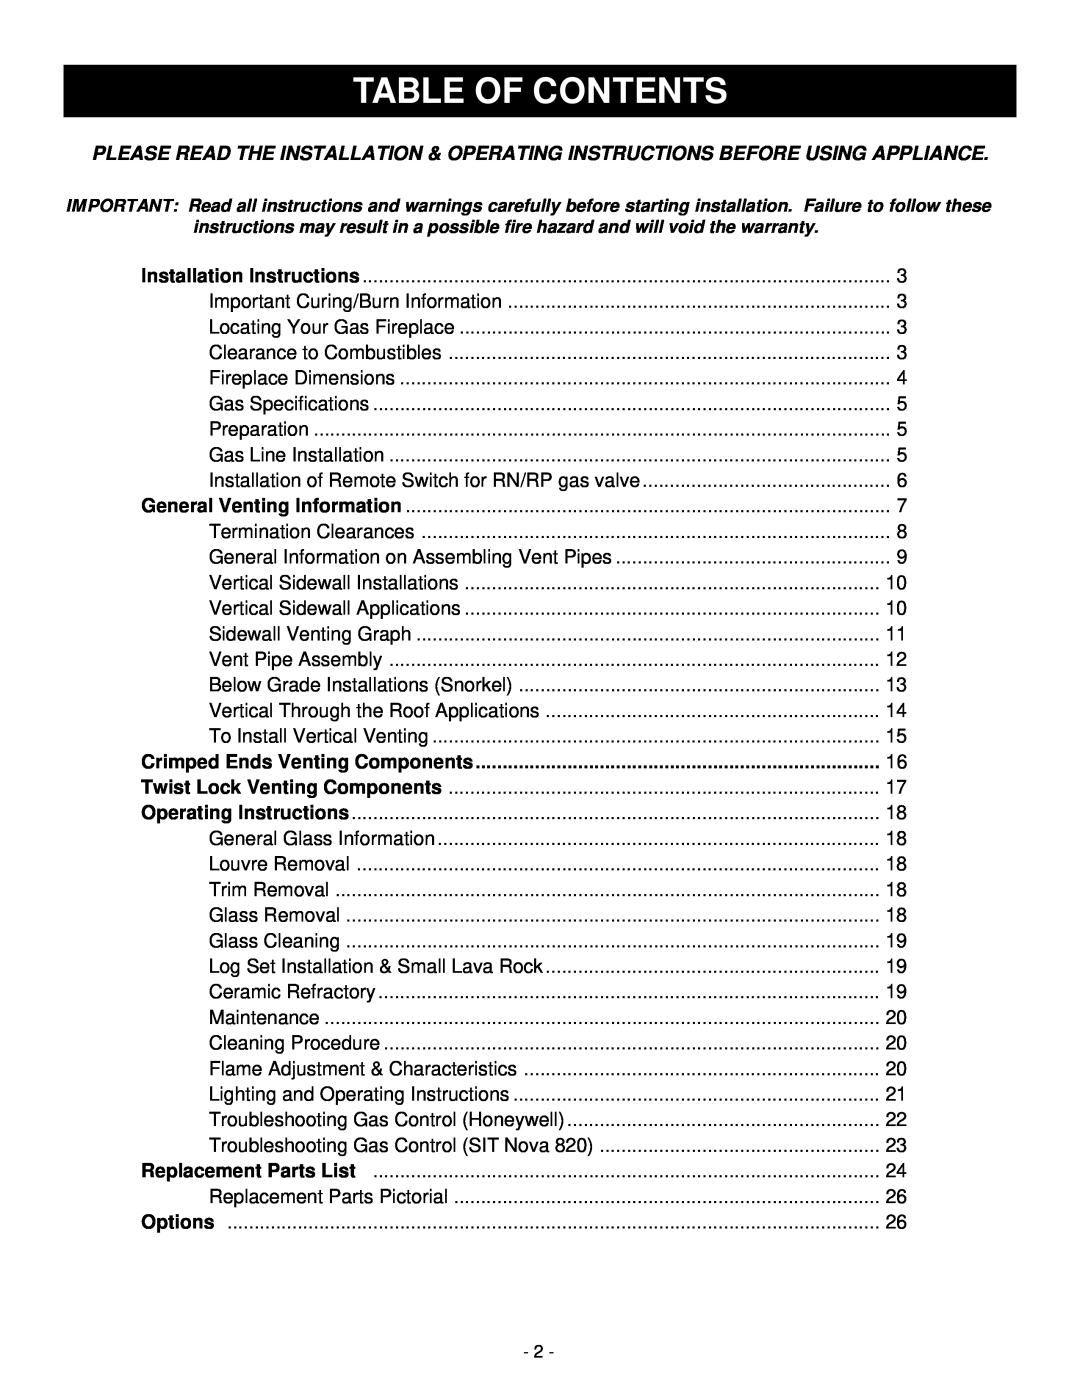 Vermont Casting D232 installation instructions Table Of Contents, Crimped Ends Venting Components 